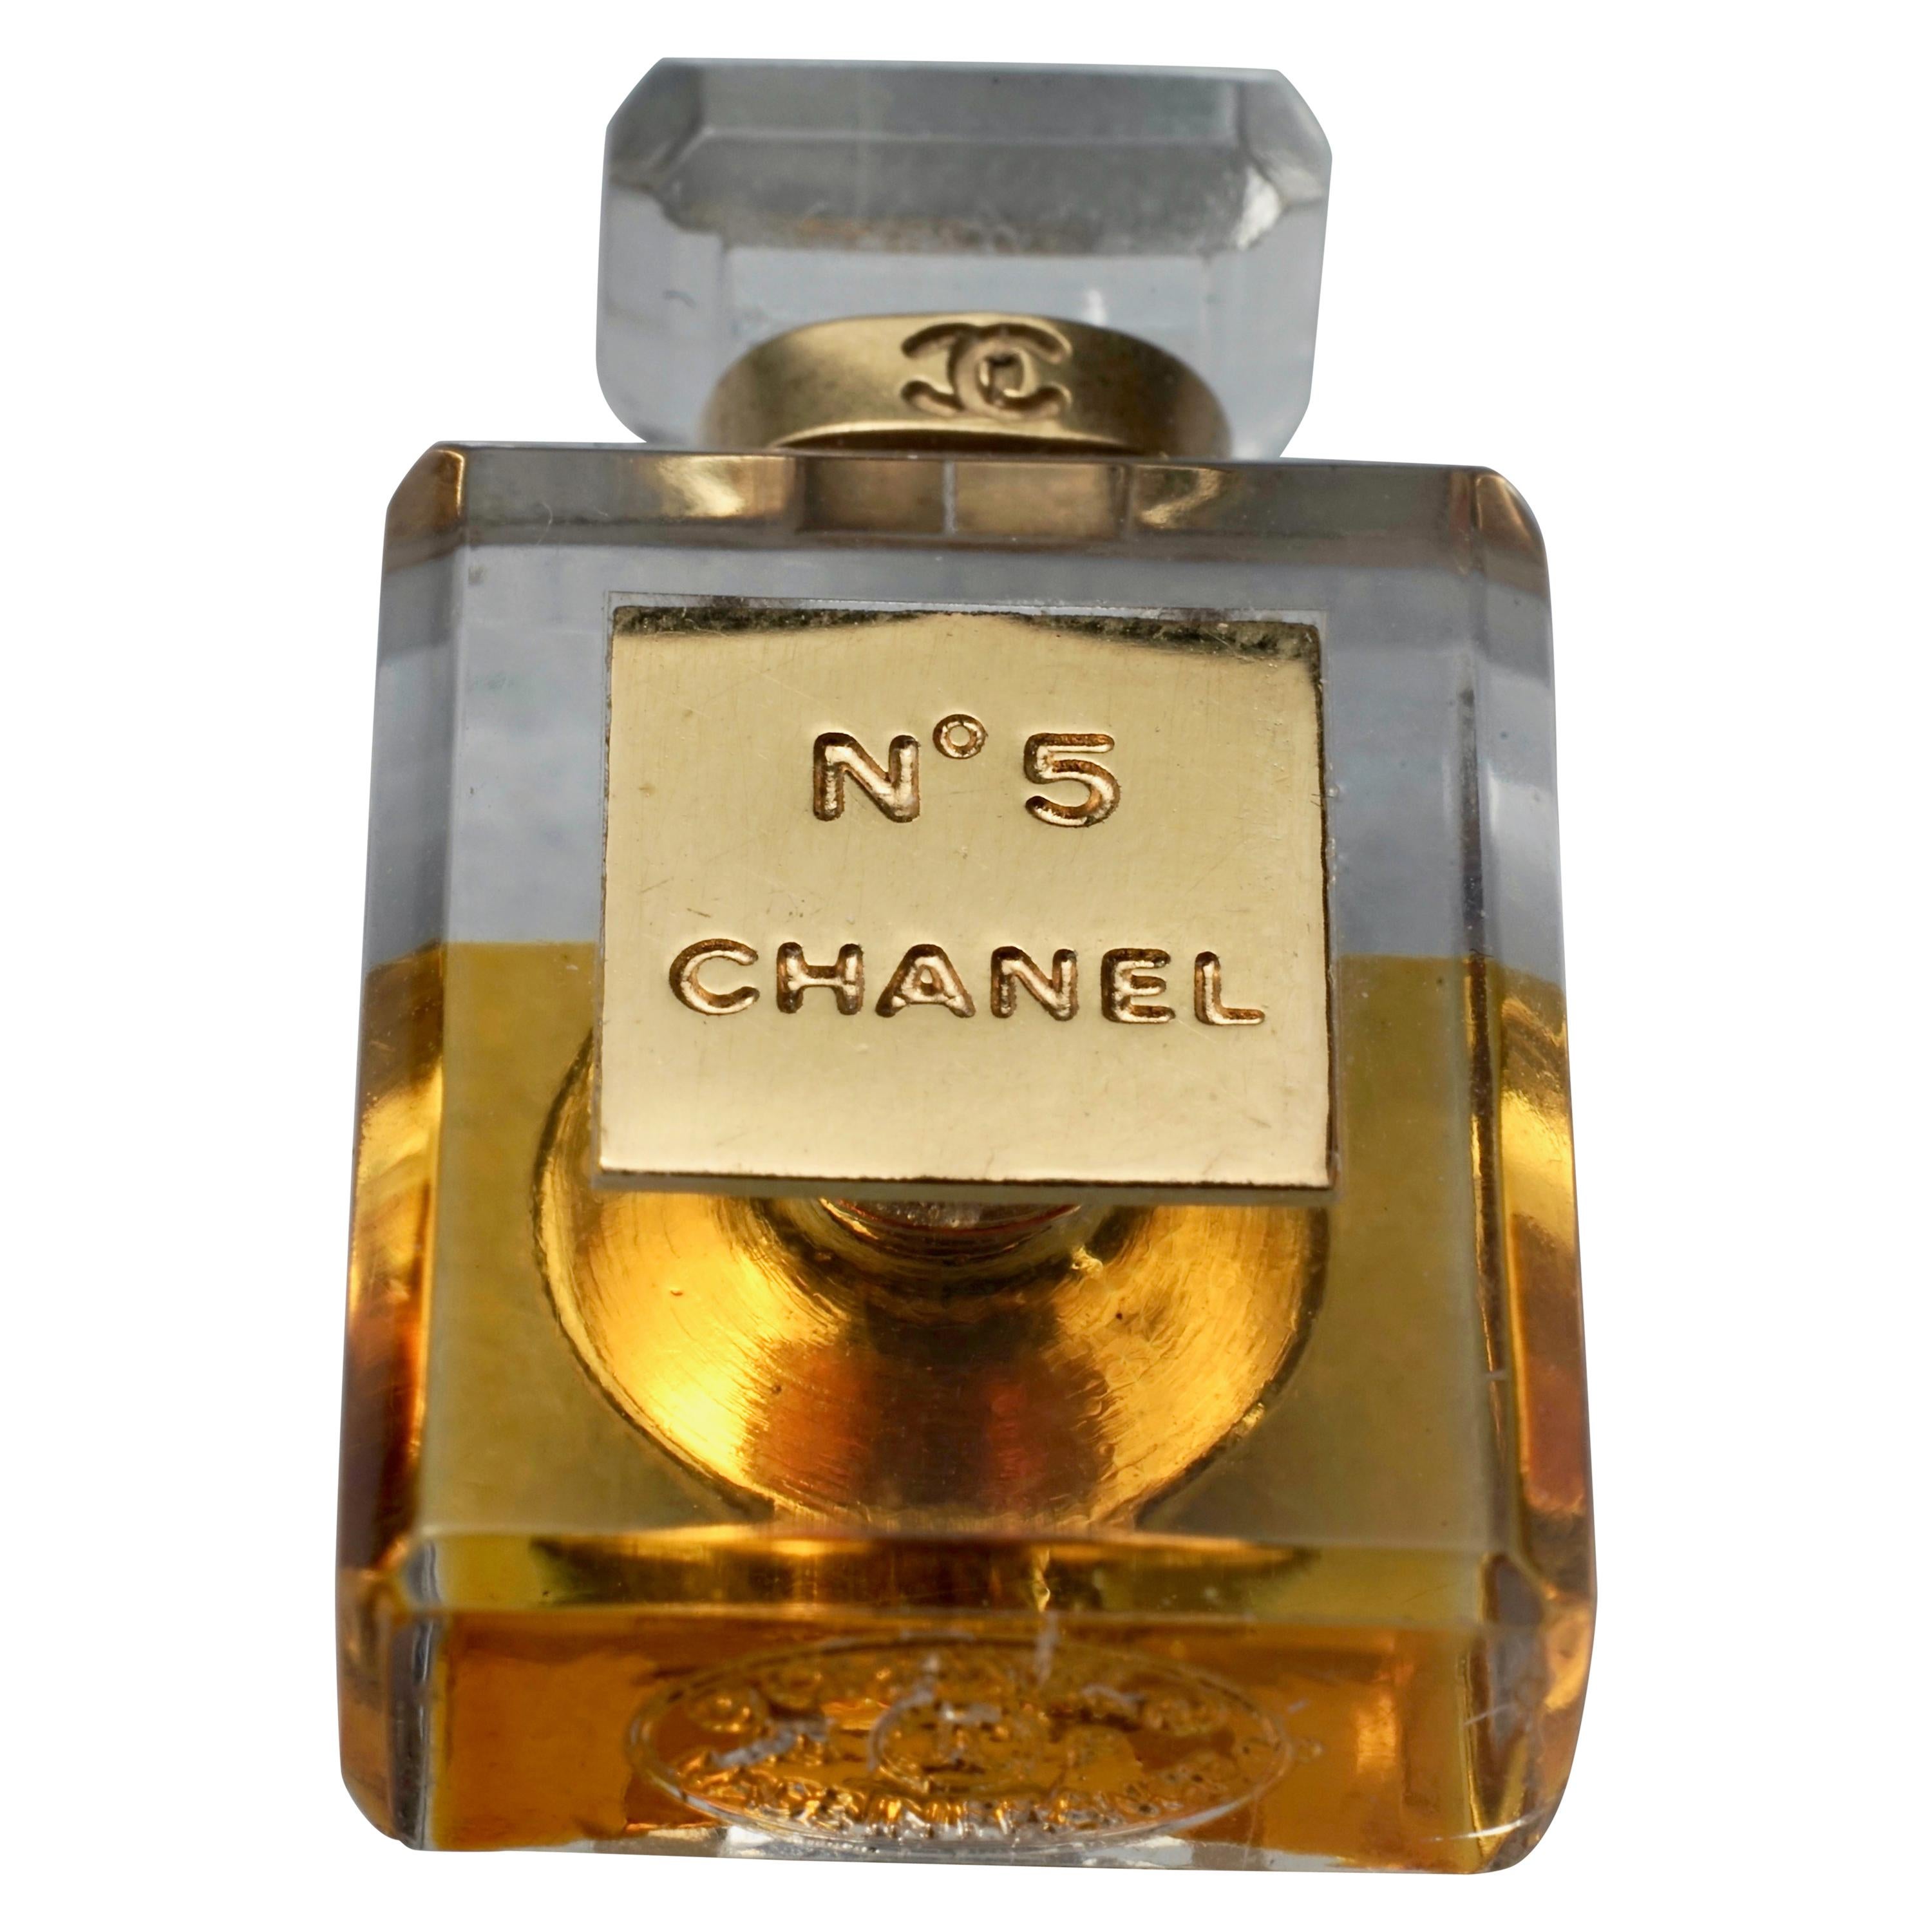 Vintage Chanel No 5 Perfume Mini – Quirky Finds